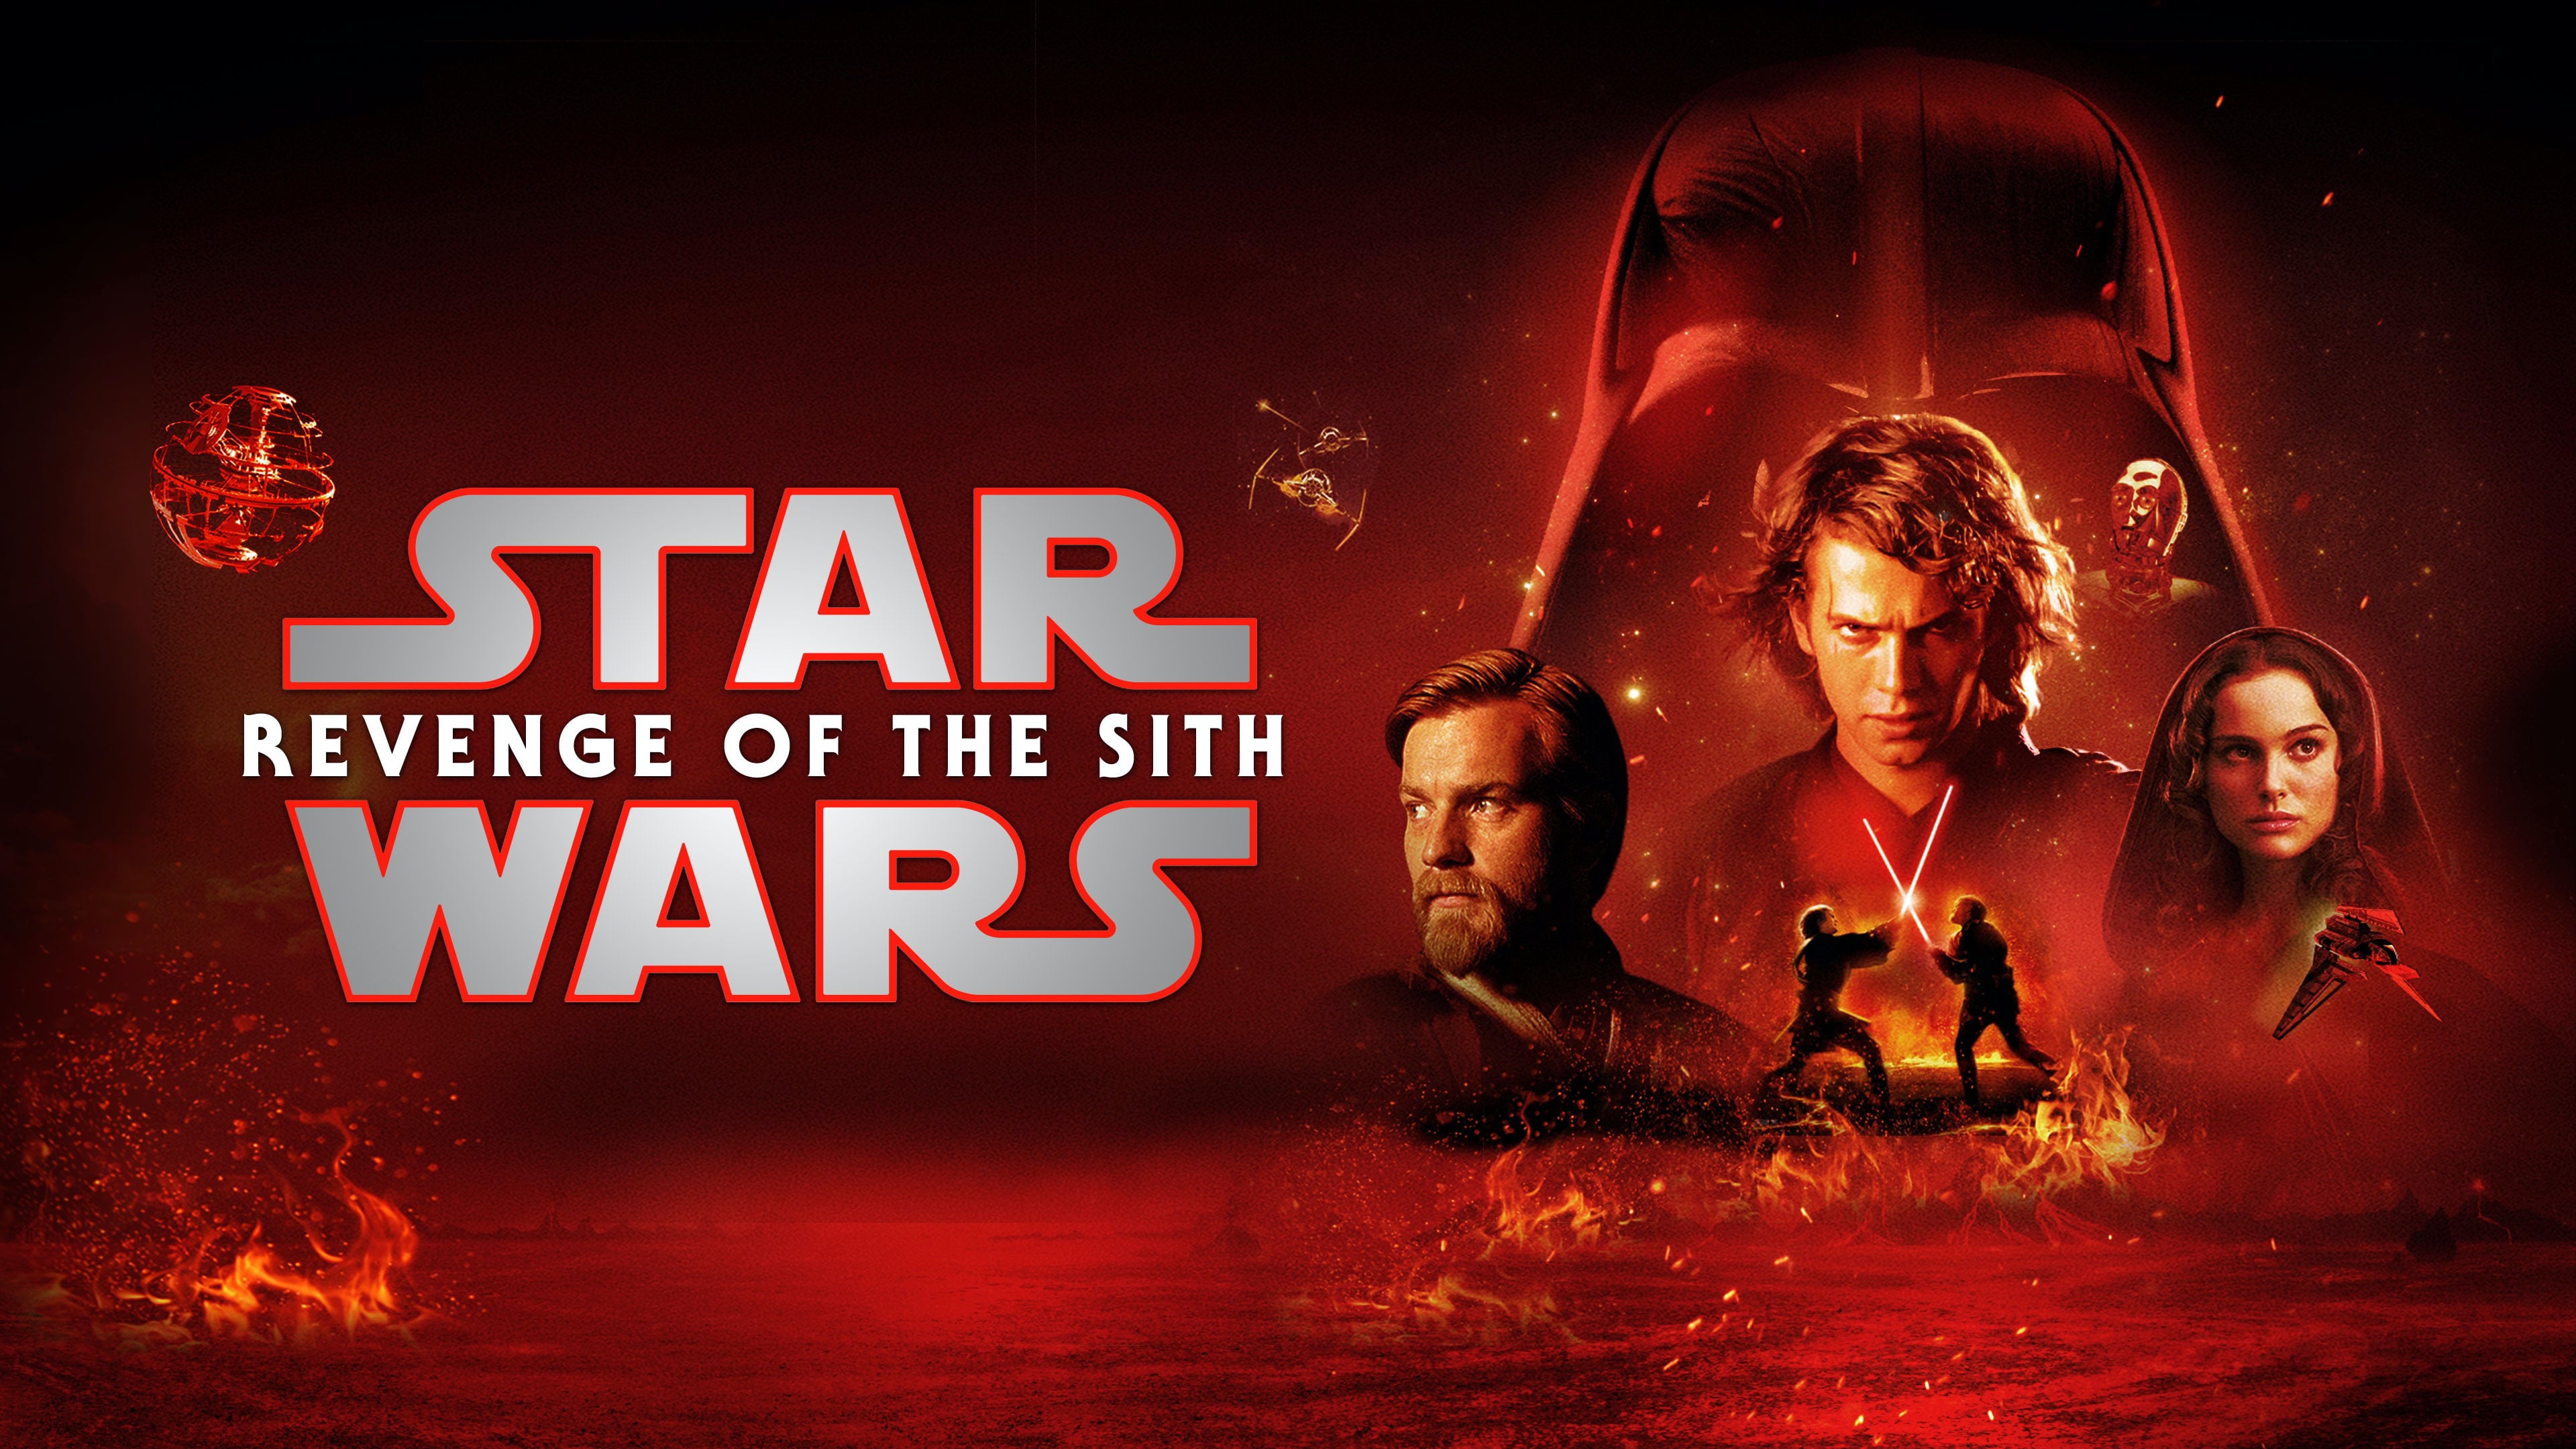 Movie Star Wars Episode Iii Revenge Of The Sith 3840x2160